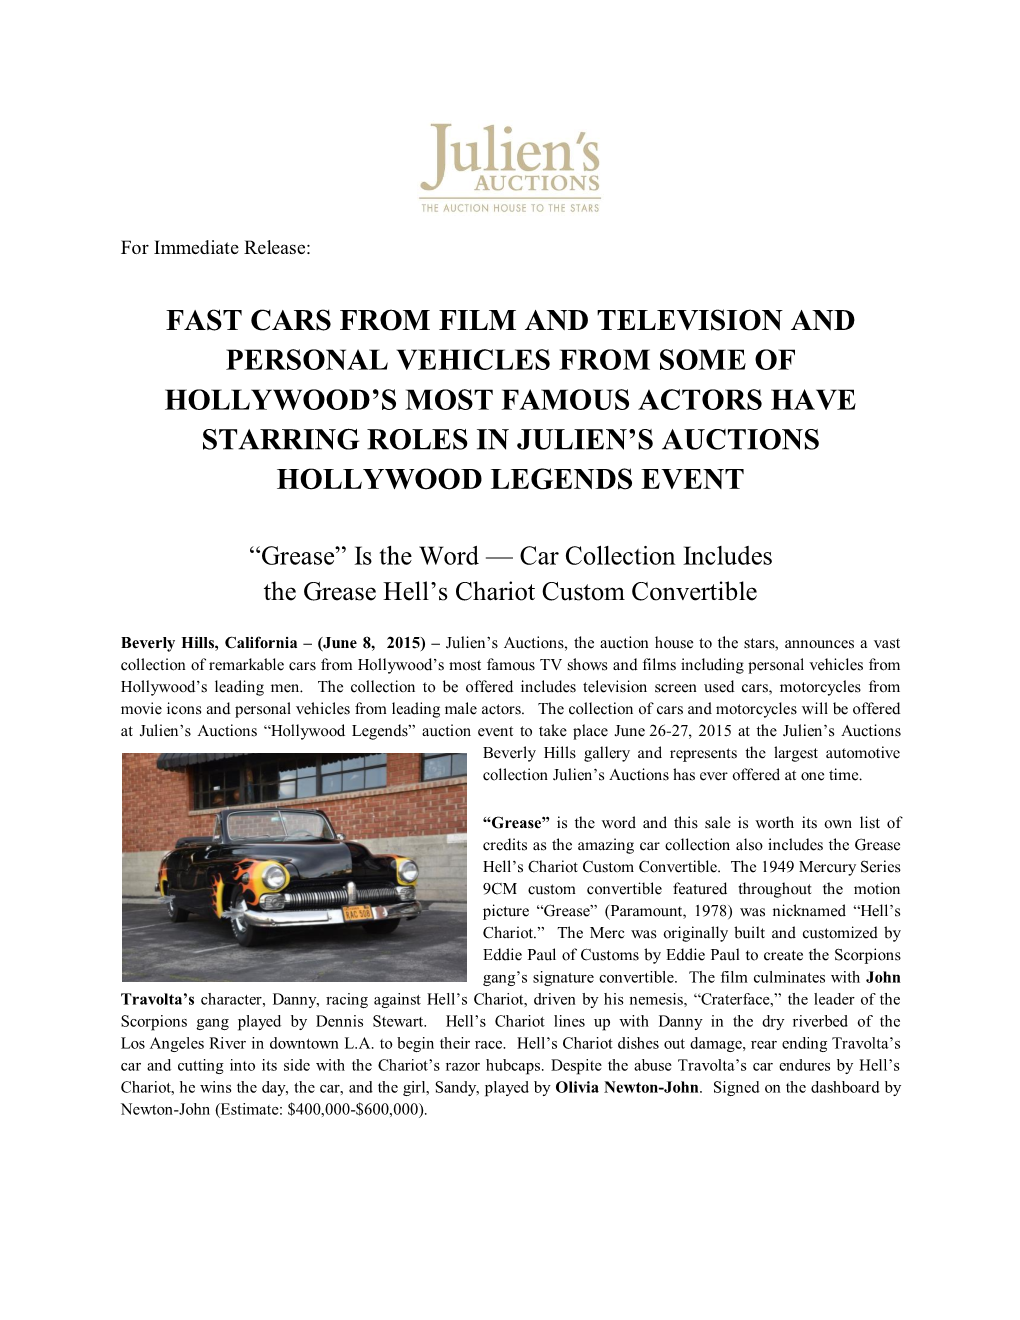 Fast Cars from Film and Television and Personal Vehicles from Some of Hollywood’S Most Famous Actors Have Starring Roles in Julien’S Auctions Hollywood Legends Event